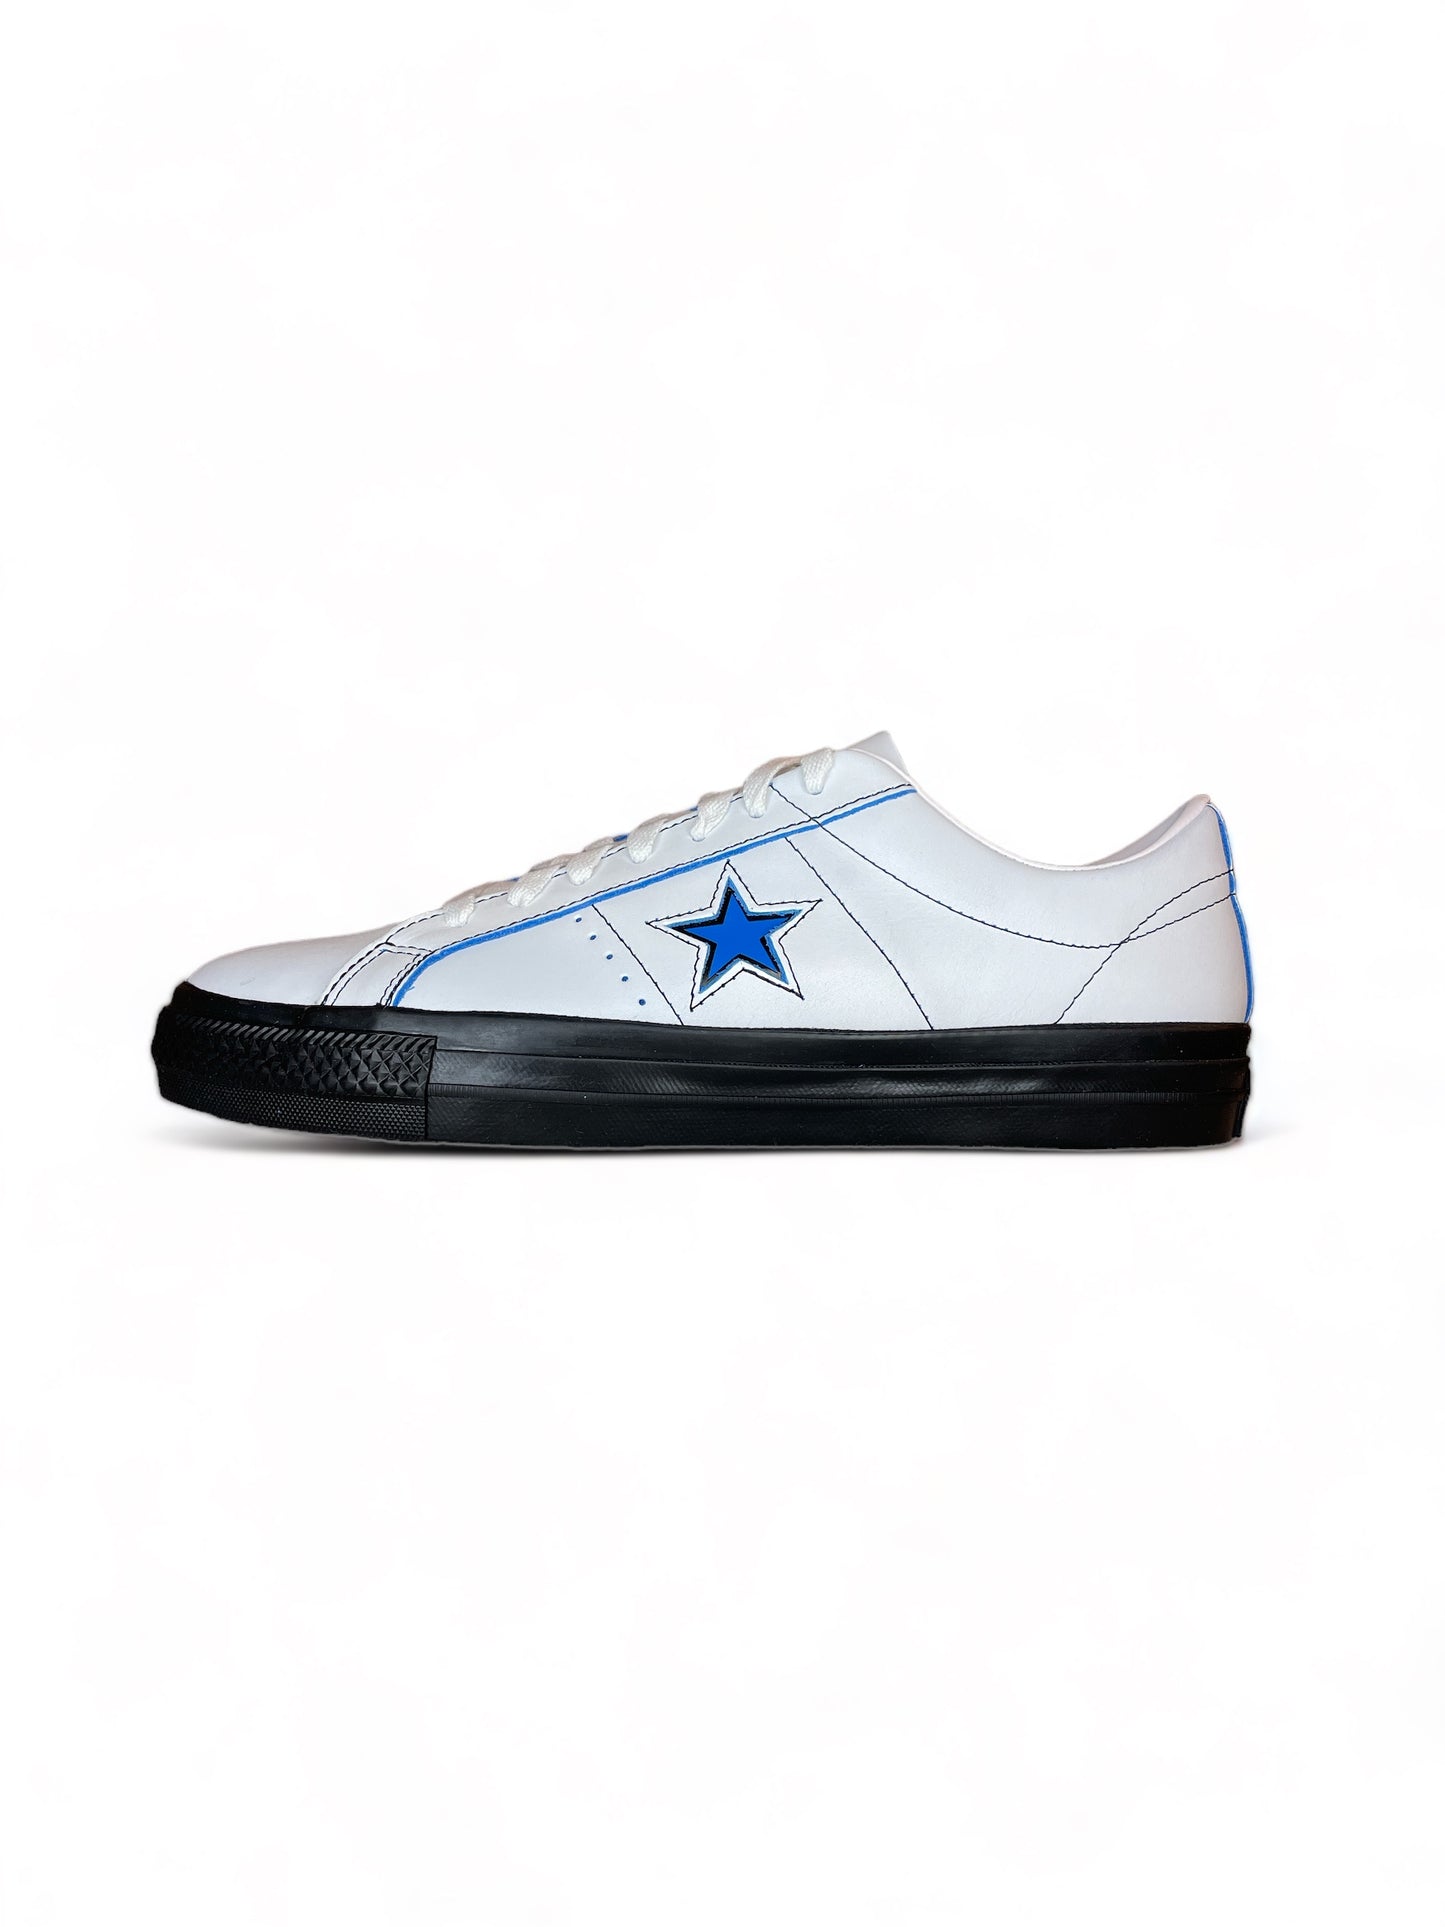 Converse One Star Pro Ox (Optical White)